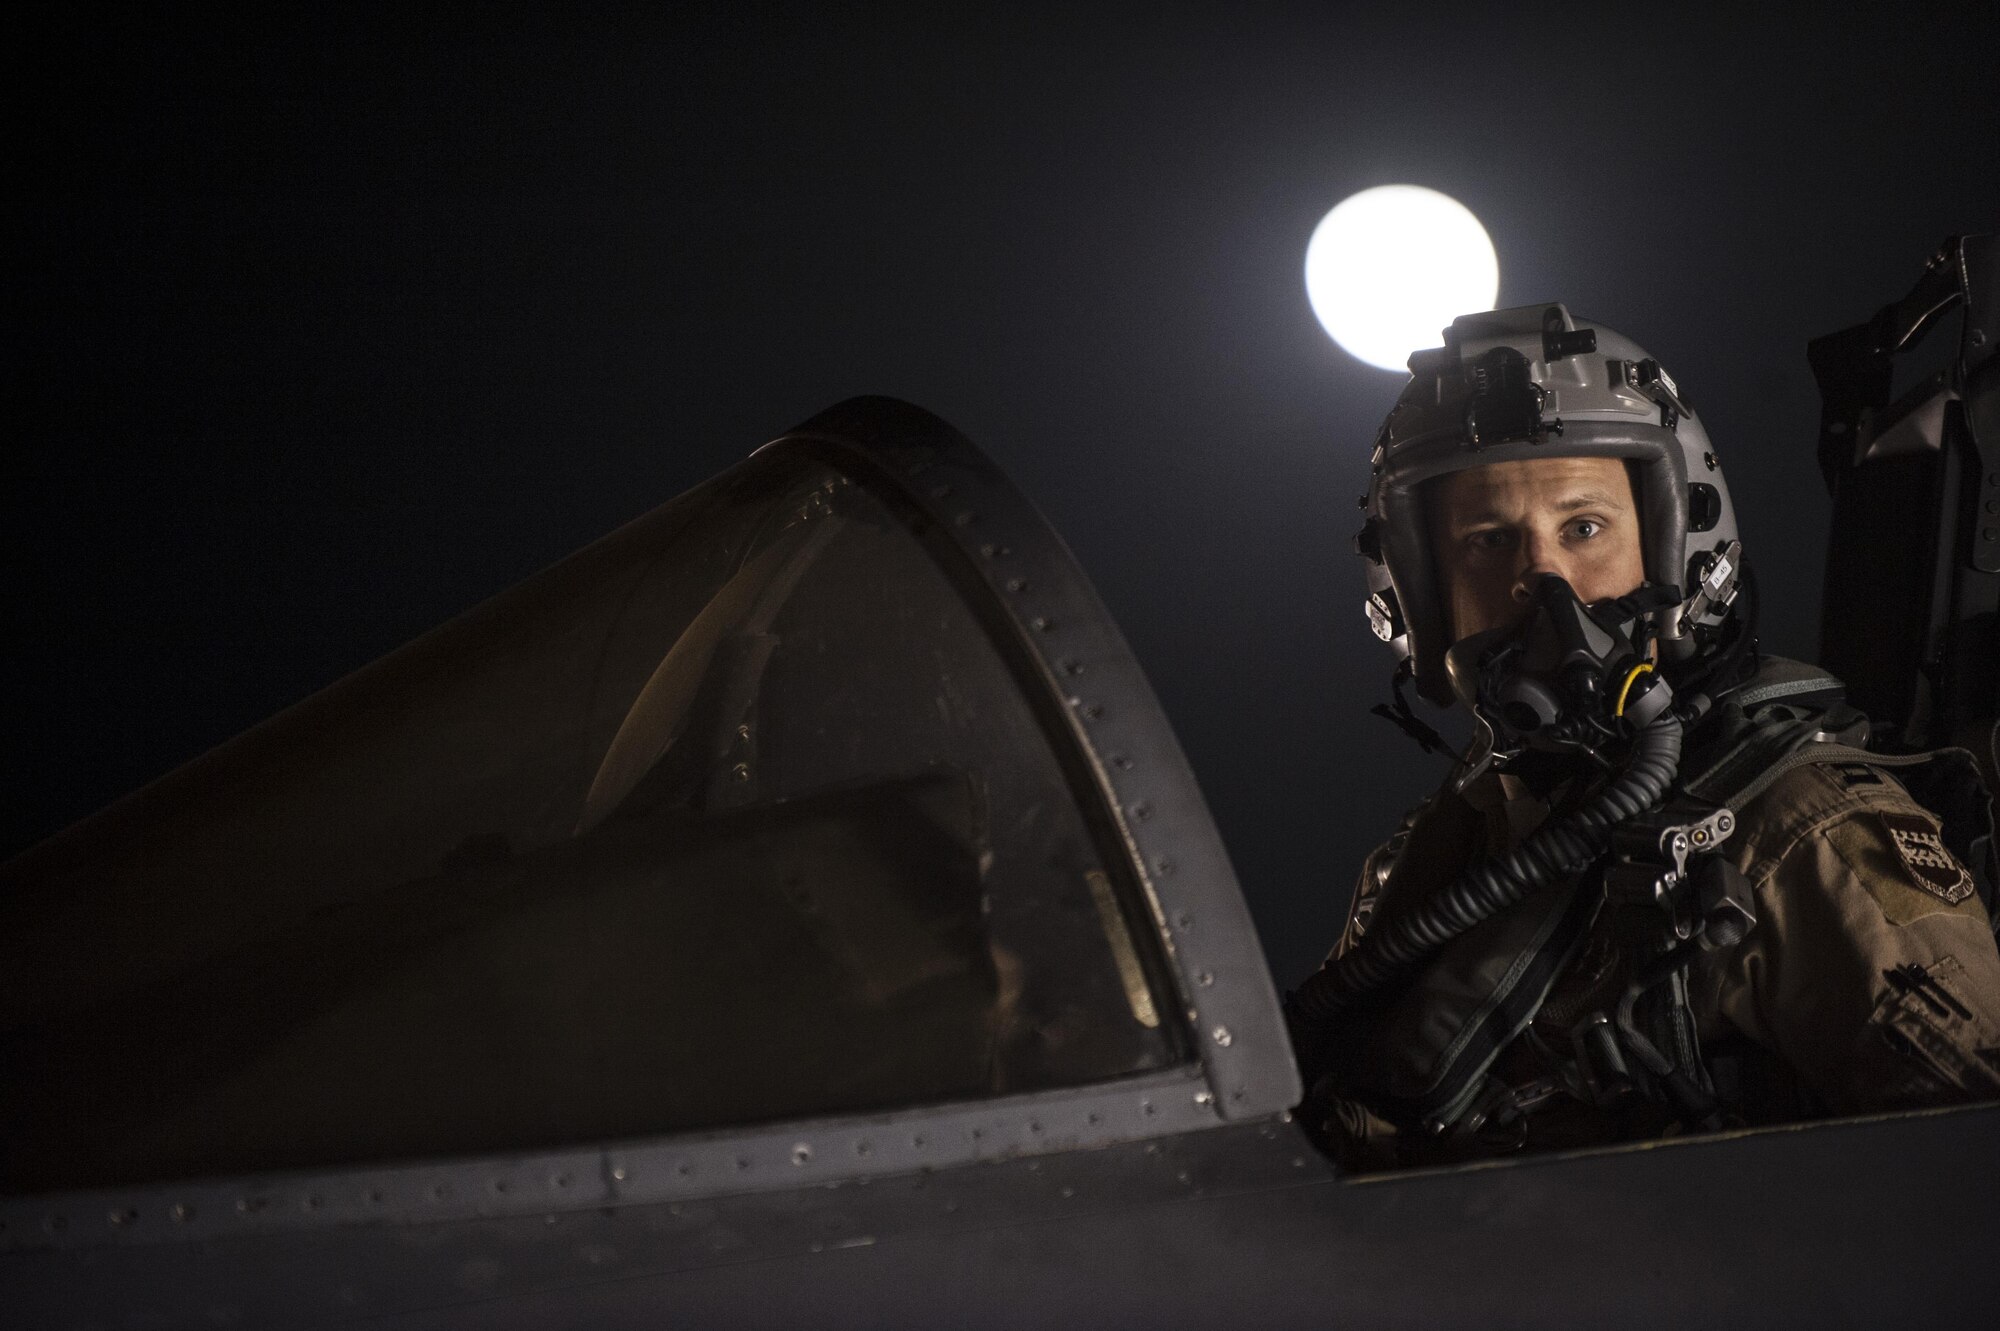 A pilot assigned to the 492nd Expeditionary Fighter Squadron readies his F-15E Strike Eagle for an early-morning takeoff October 4, 2017, at an undisclosed location in Southwest Asia. The 492nd EFS flew thousands of sorties night and day for the last six months, providing close-air support for Coalition ground forces and striking Islamic State forces in the region.